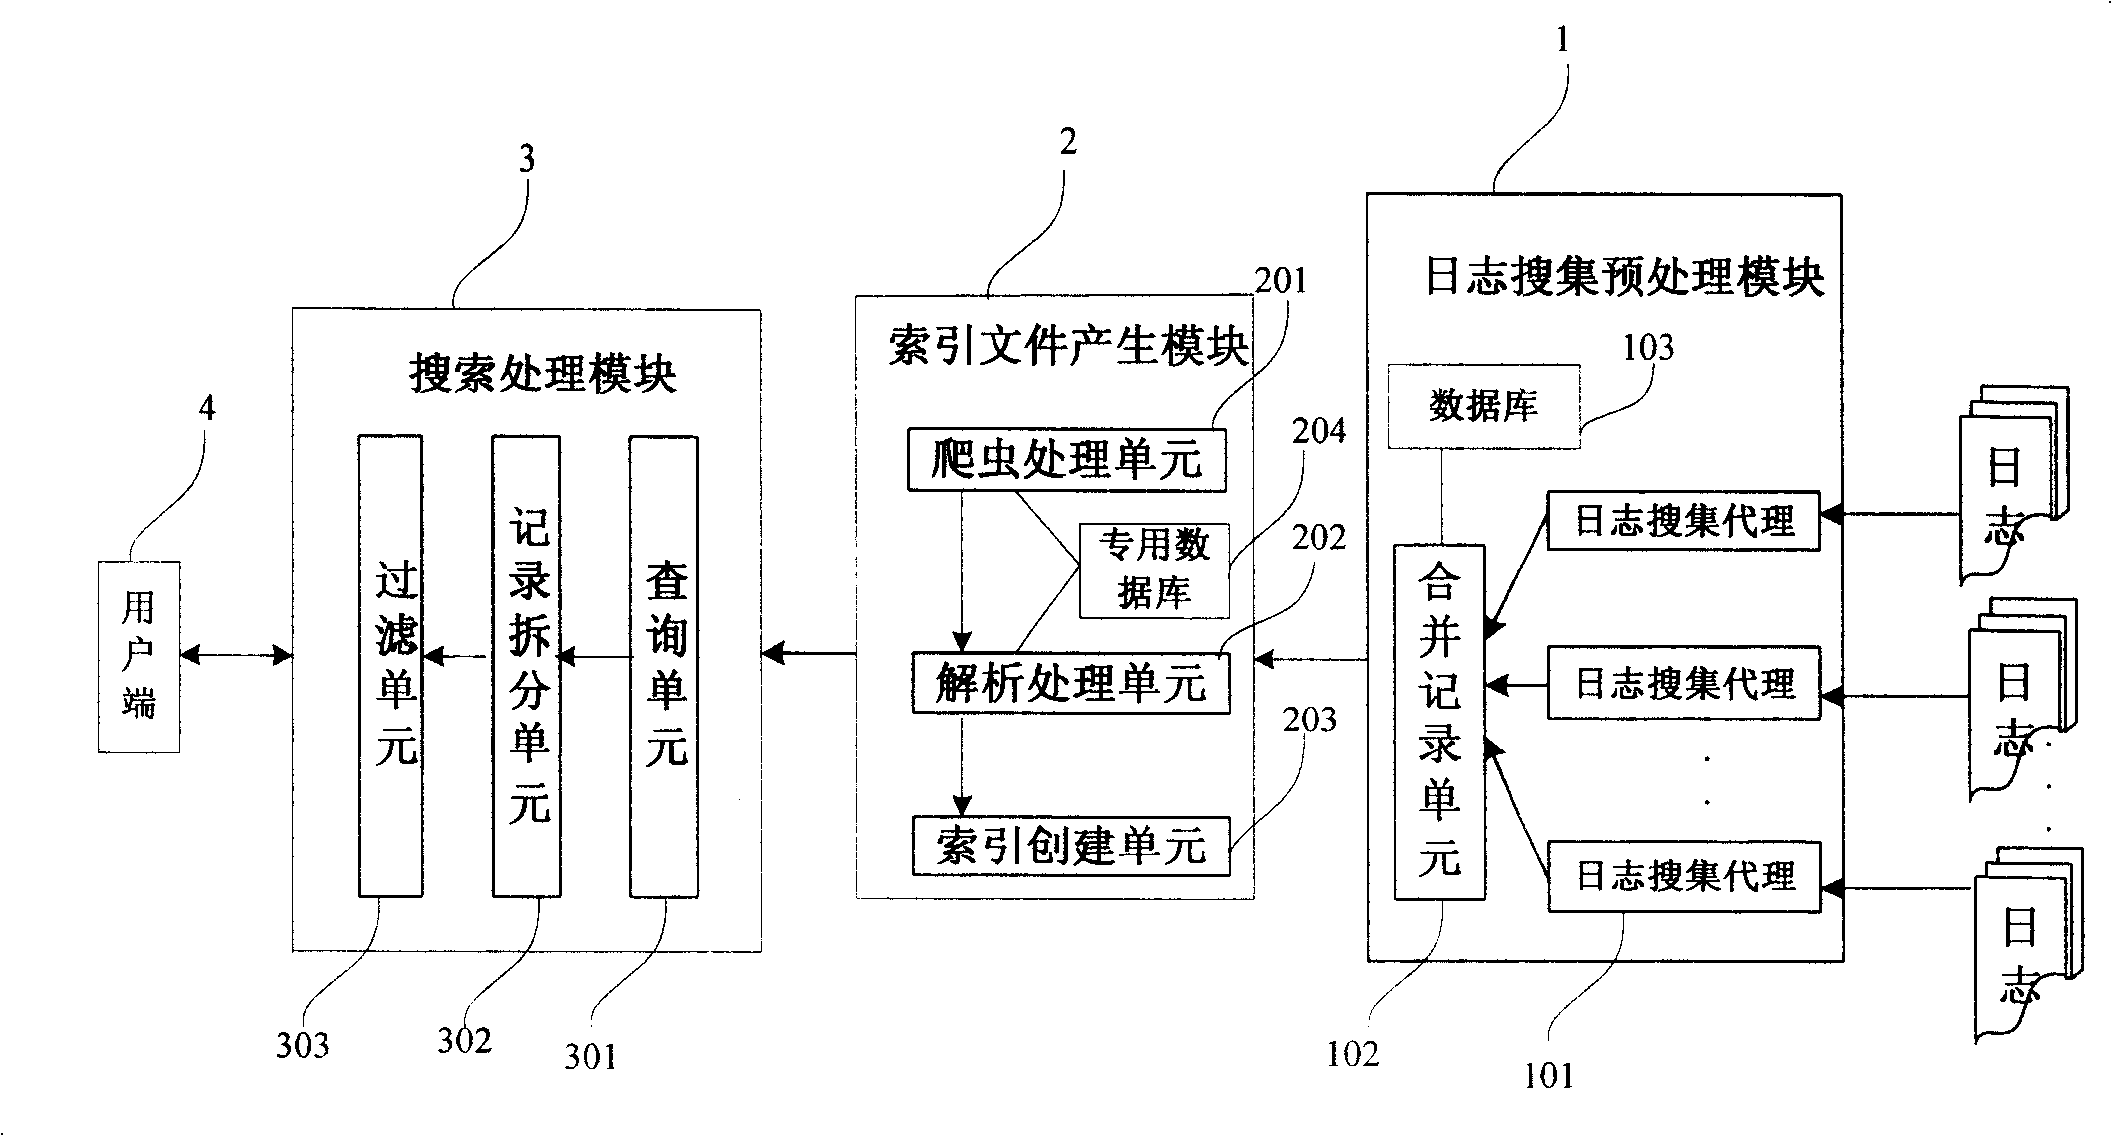 Method and system for managing journal